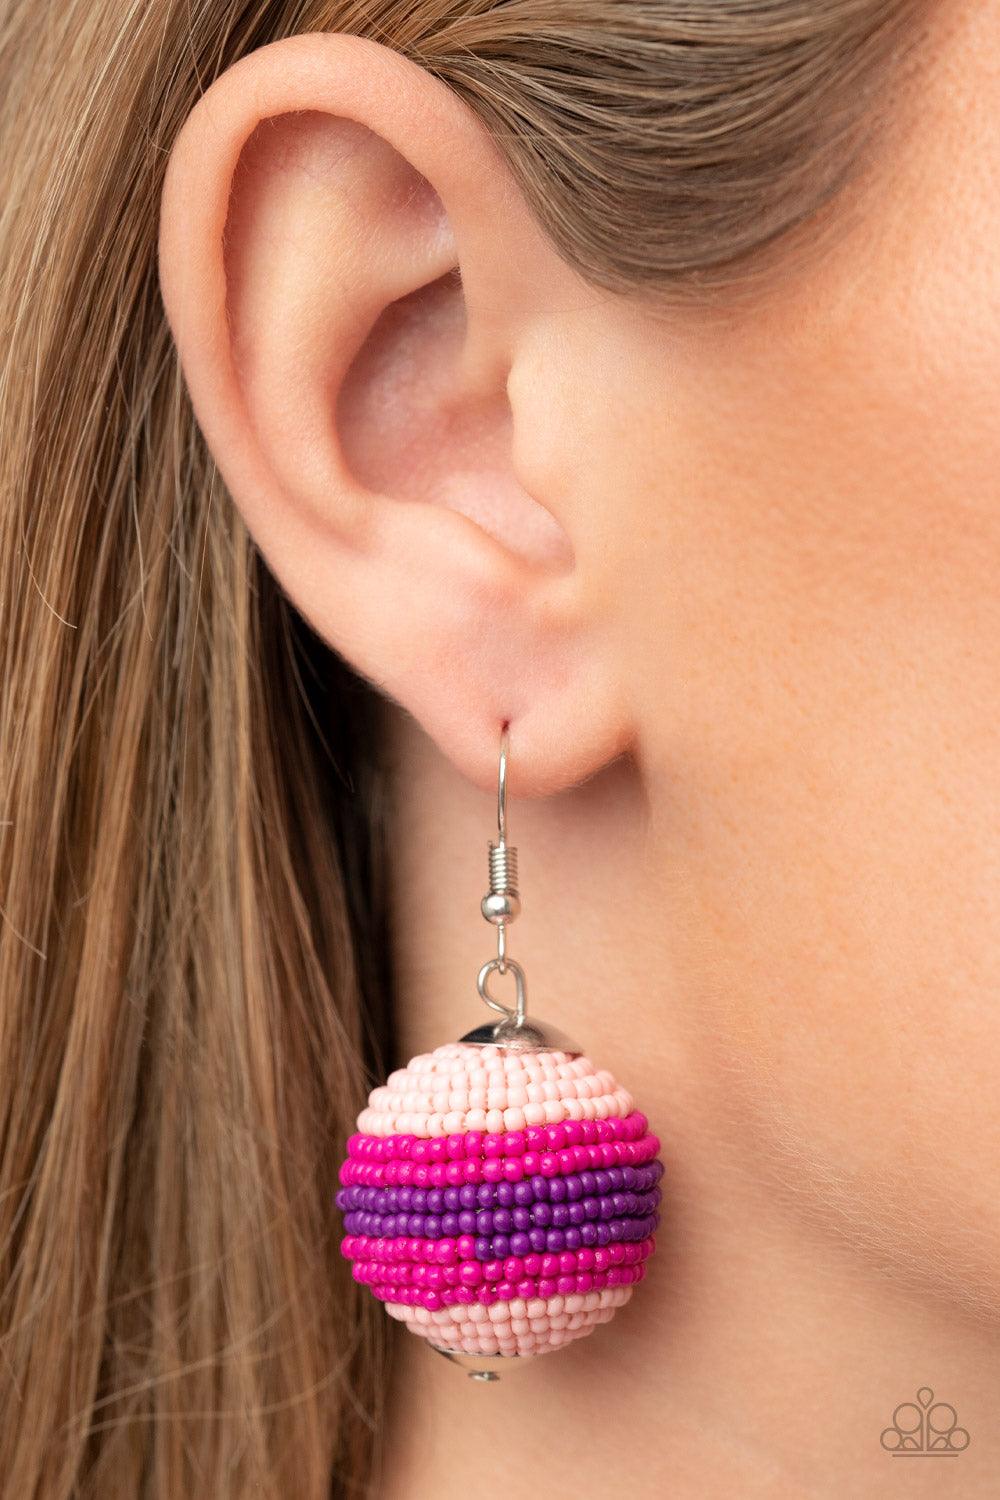 Paparazzi Accessories Zest Fest - Pink Strands of Pale Rosette, Fuchsia Fedora, and purple seed beads decoratively spin around a spherical frame, resulting in a colorful 3-dimensional display. Earring attaches to a standard fishhook fitting. Sold as one p